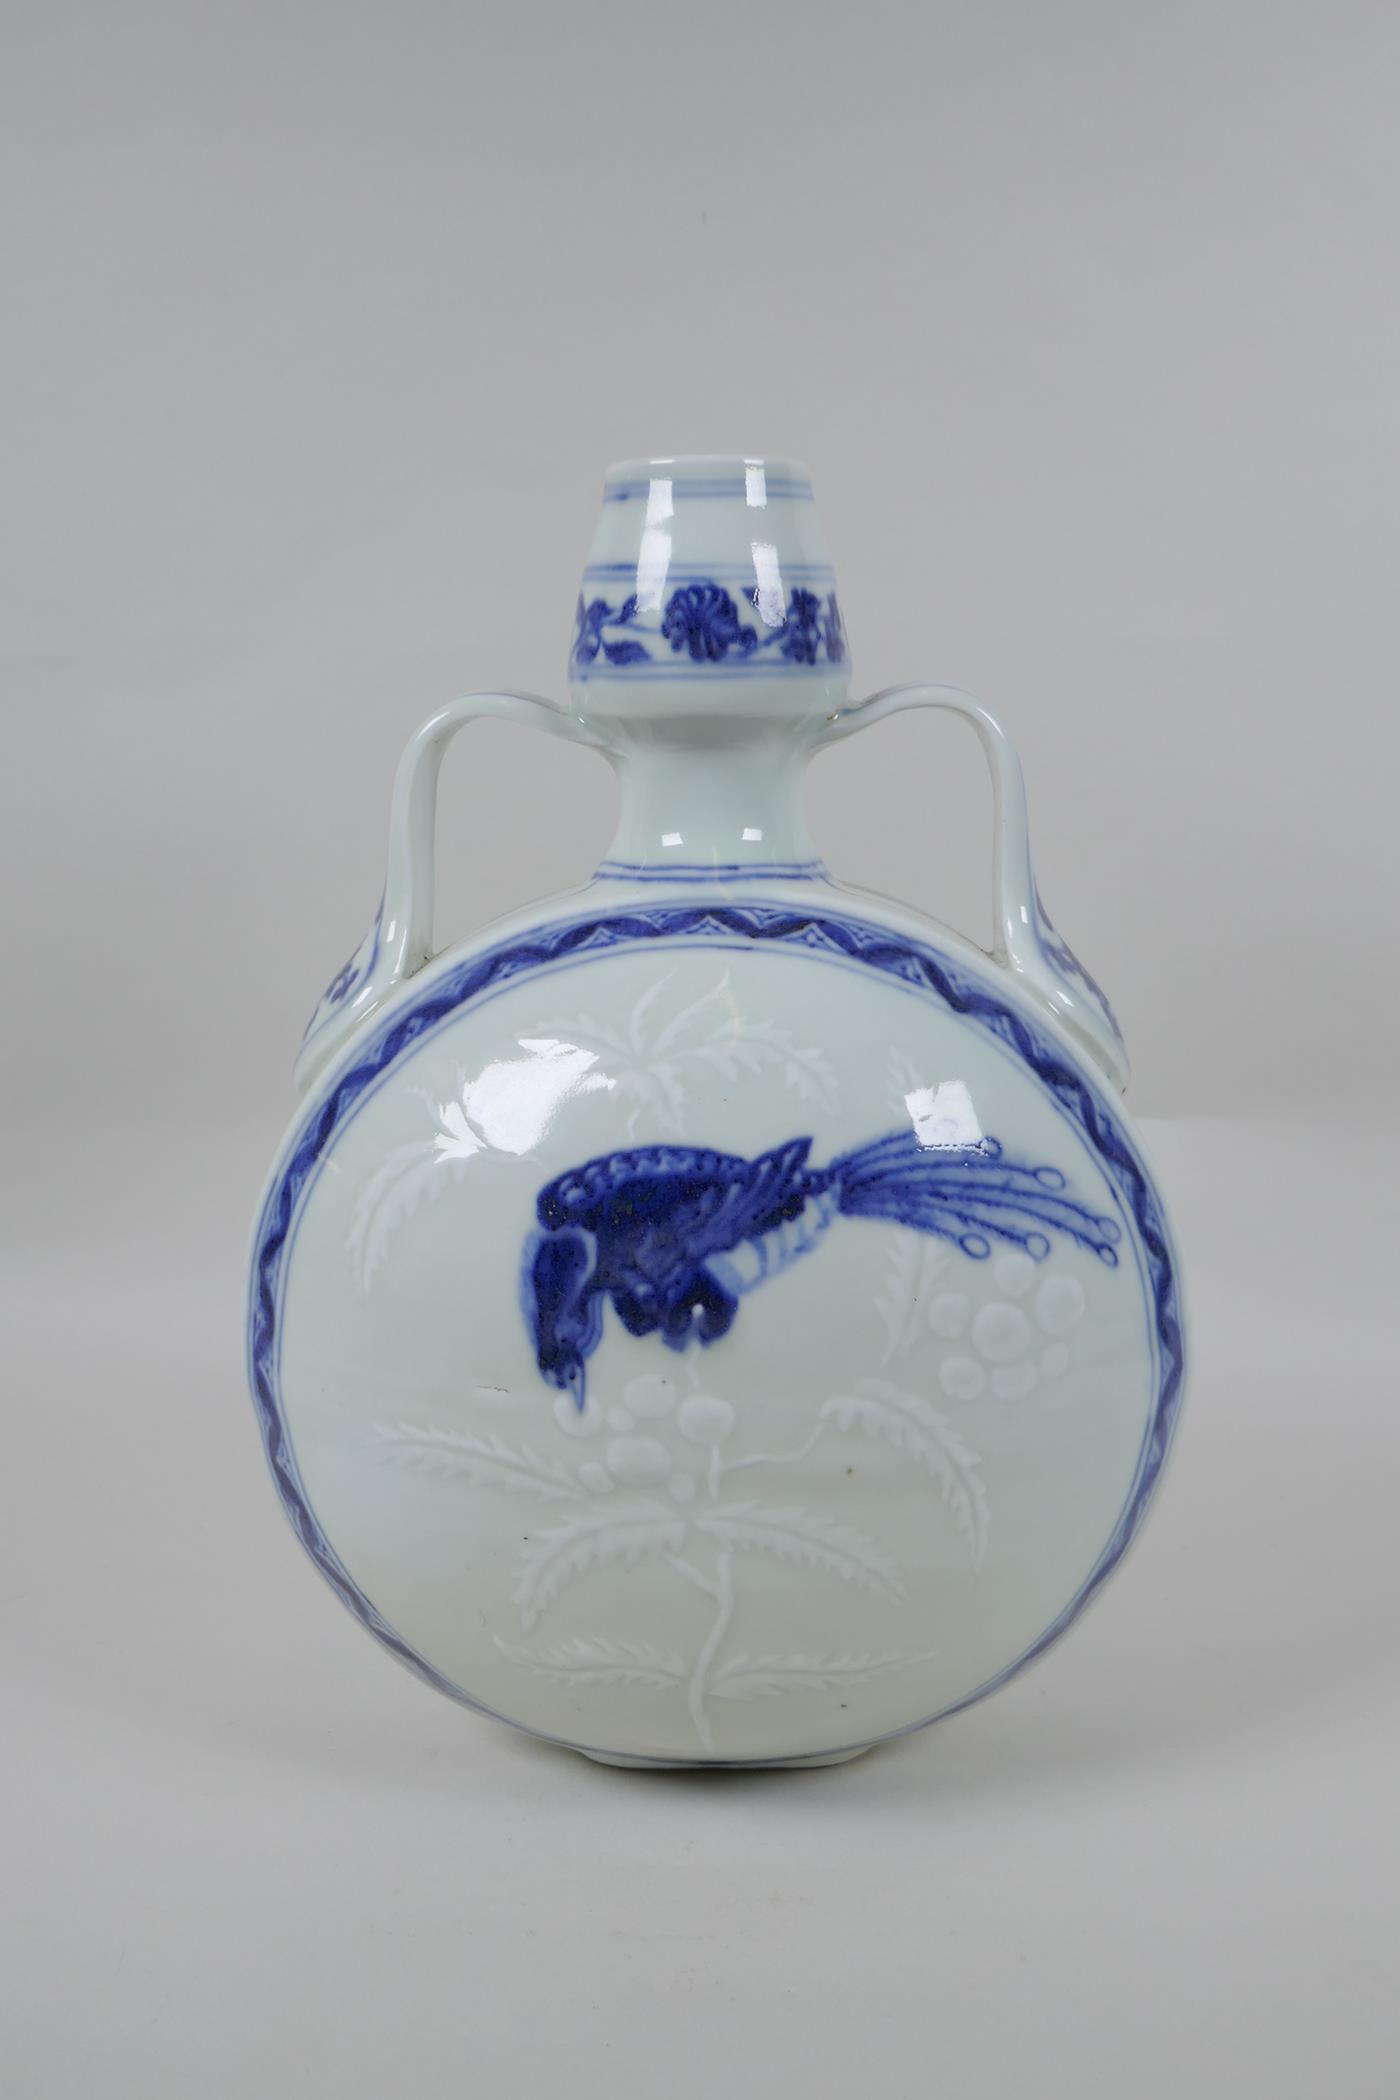 A Chinese blue and white porcelain garlic head shaped moon flask with two handles, decorated with